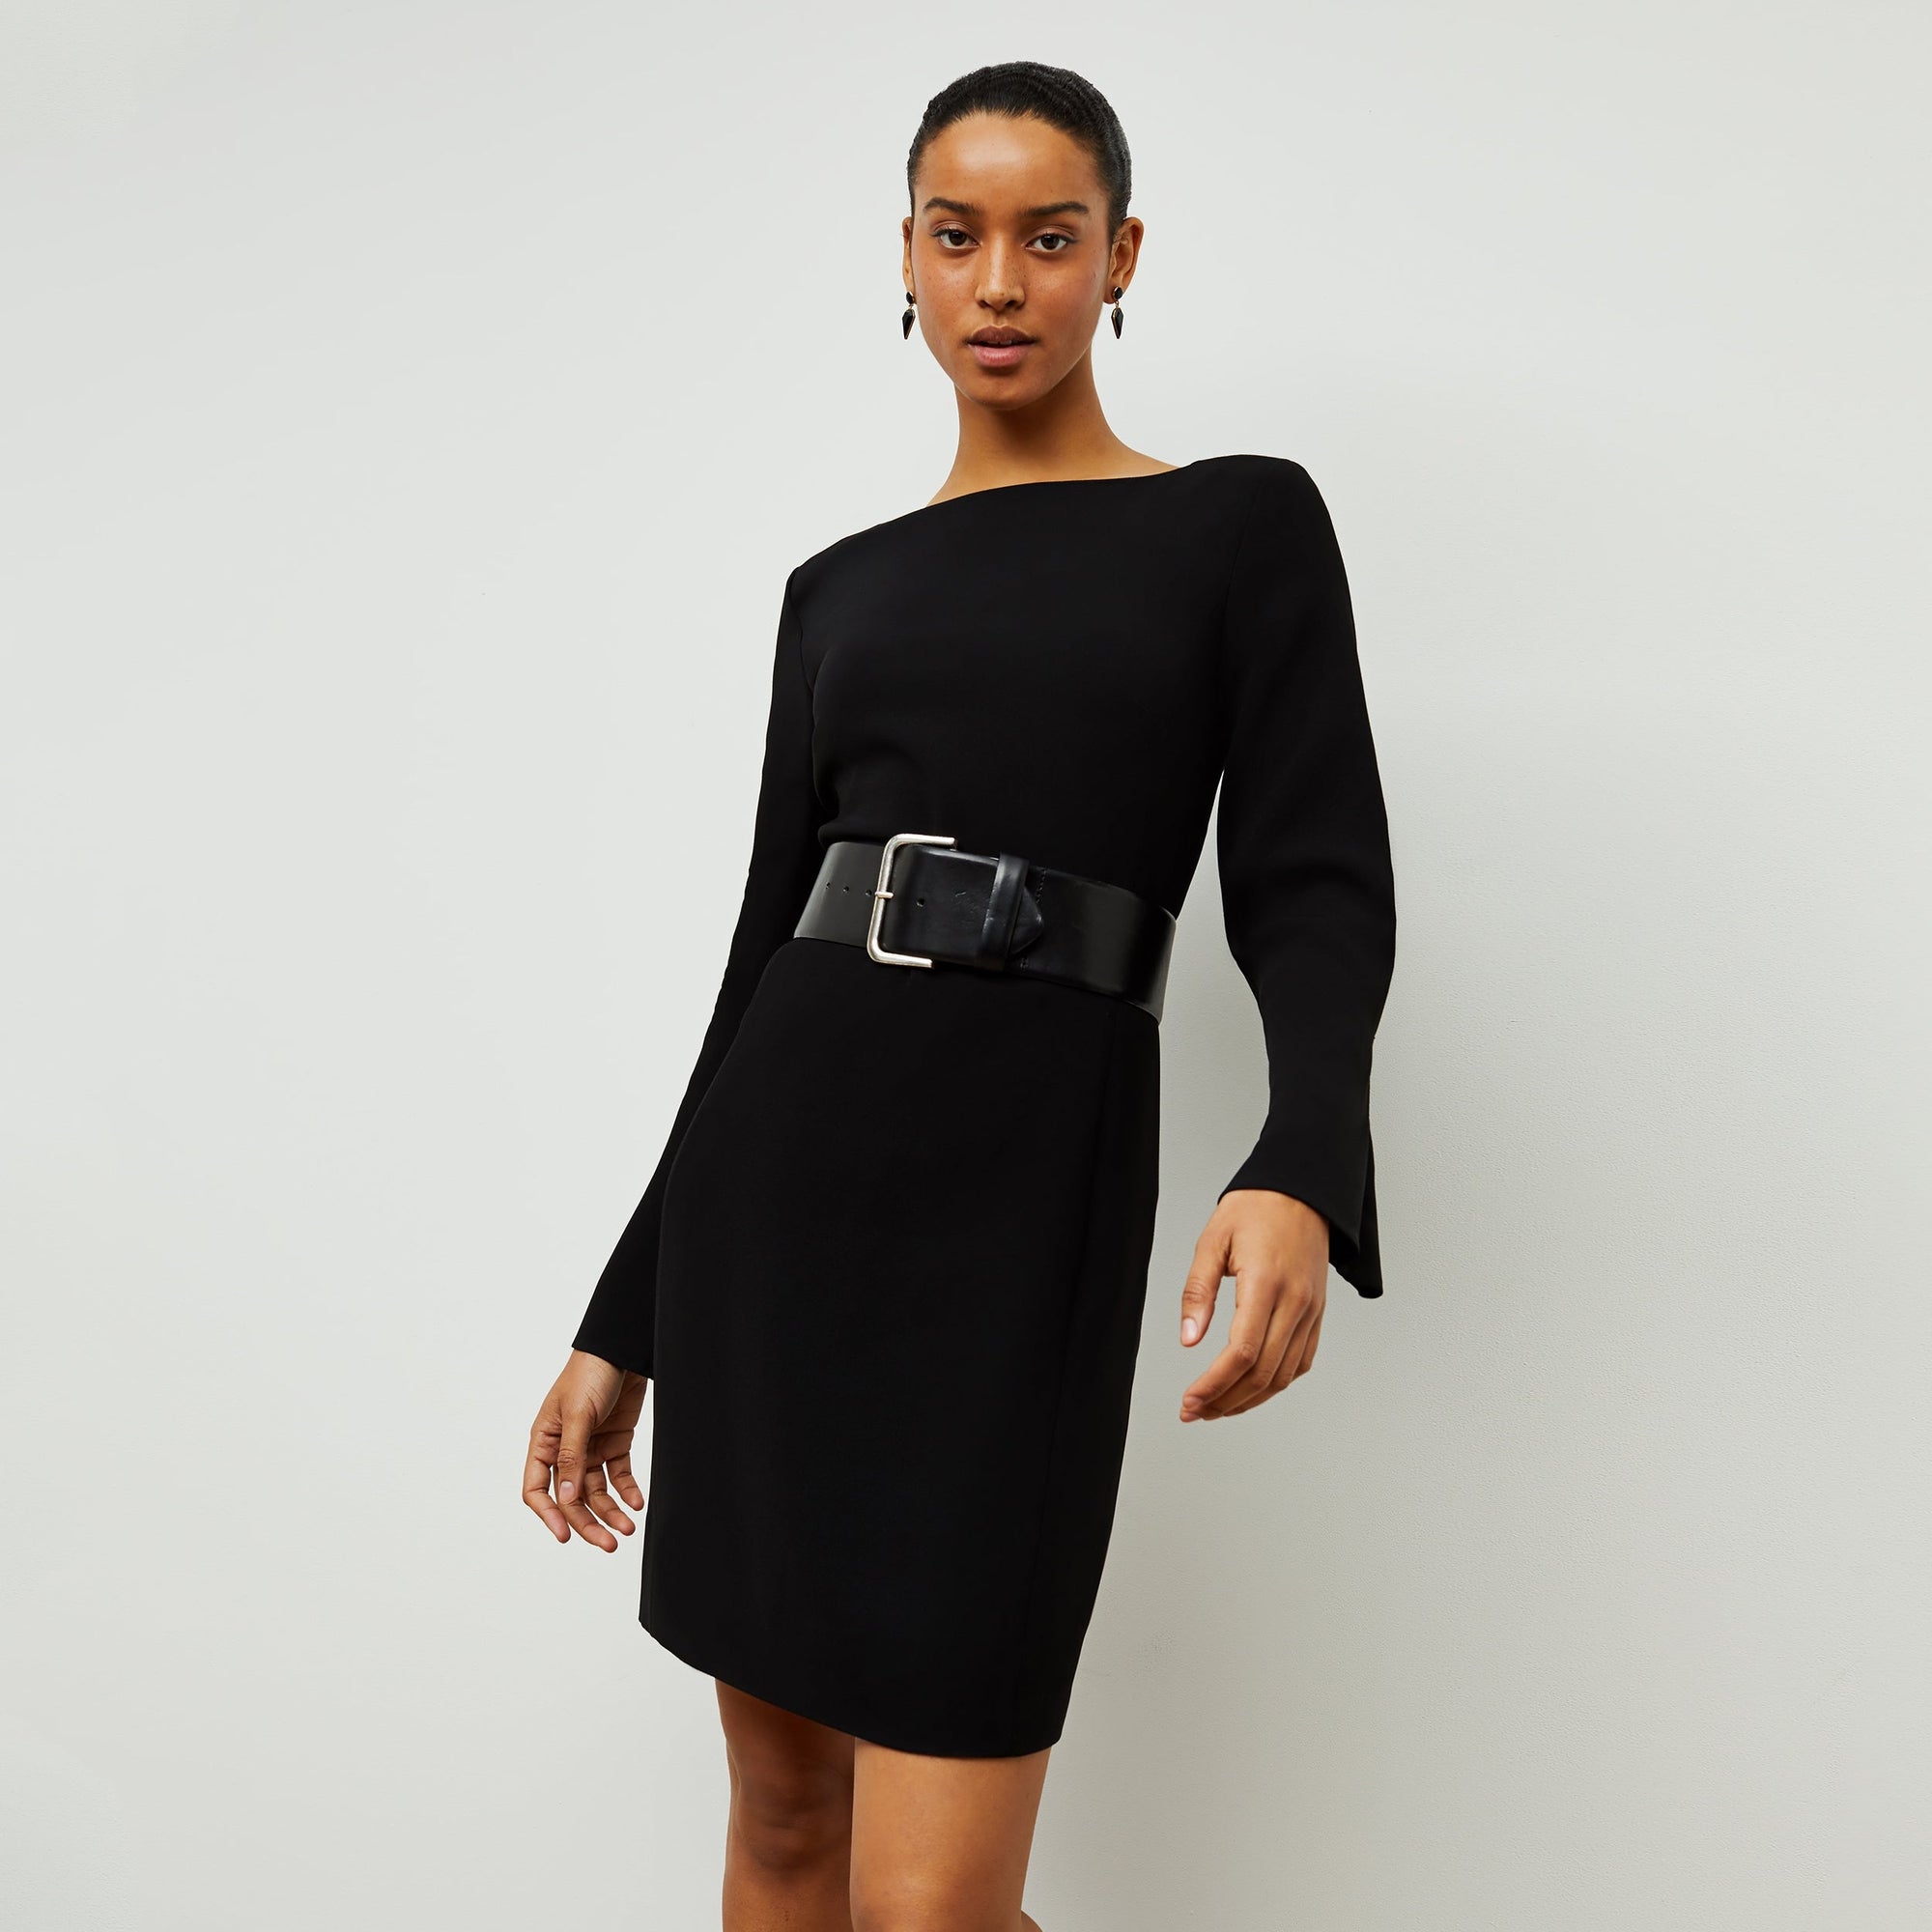 Front image of a woman standing wearing the Regina Dress in Black| Exclude